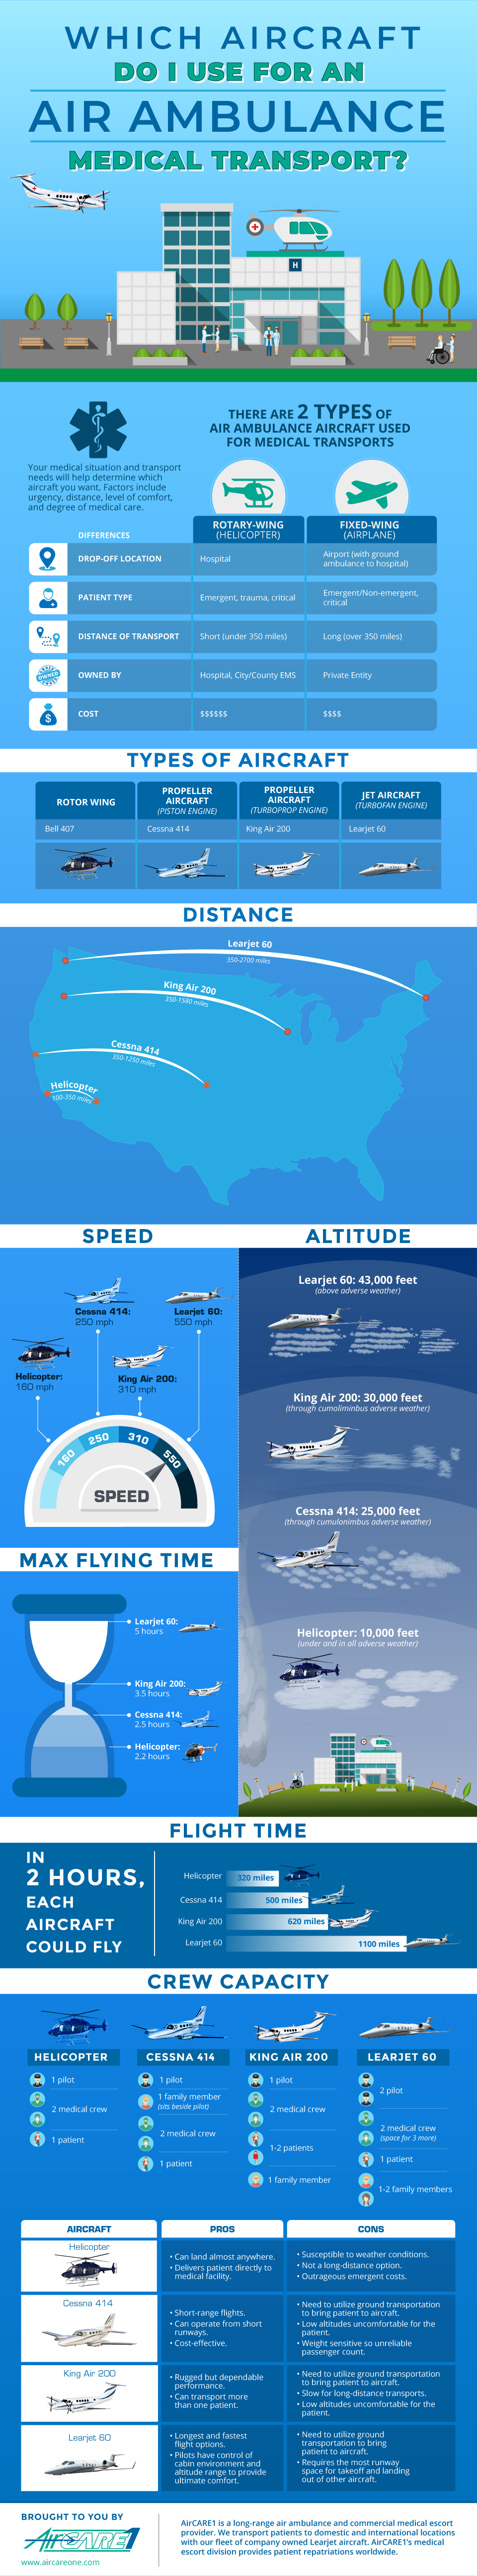 Air Ambulance Aircraft Type Infographic